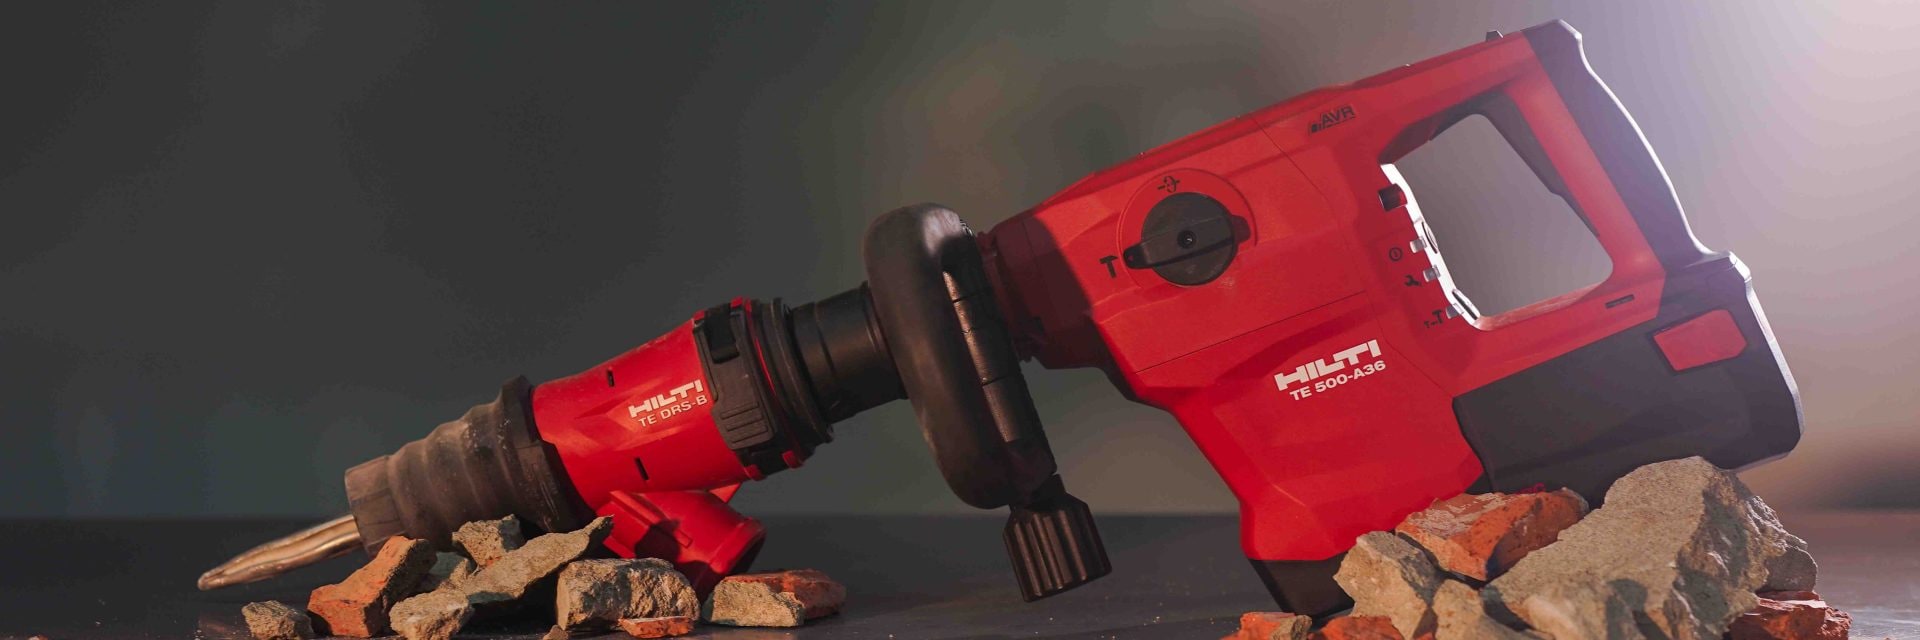 the TE 500-AVR is the world's first cordless breaker